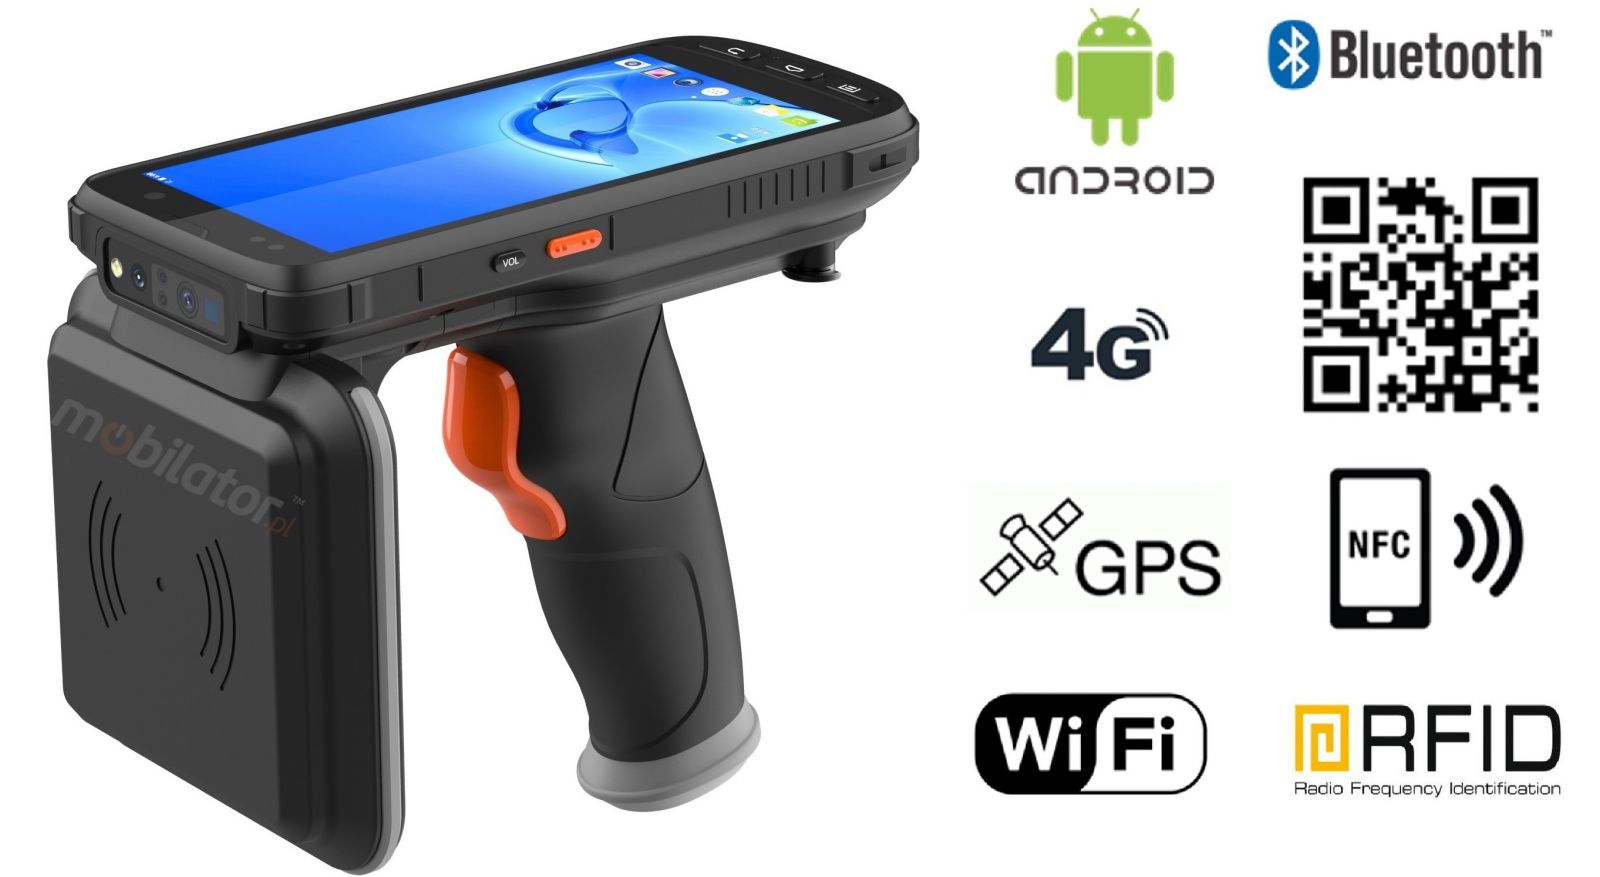 MobiPad XX-B6 v.16 - Data collector (IP65) with a 2D code scanner (Mindeo ME5600) and NFC + 4G LTE + Bluetooth + WiFi + UHF 18m with extended memory (4GB + 64GB) + Pistol Grip 